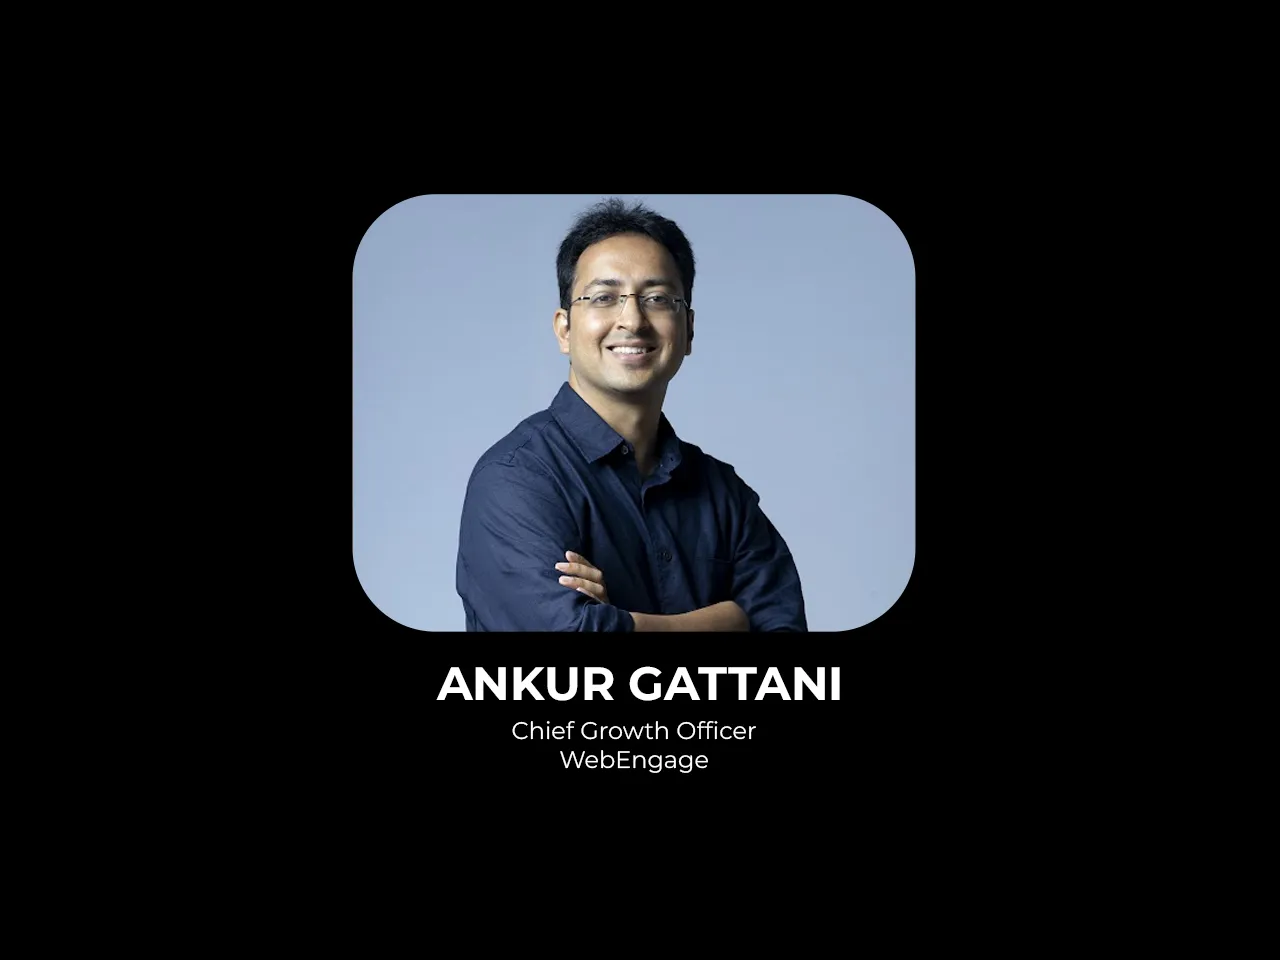 WebEngage elevates Ankur Gattani to Chief Growth Officer